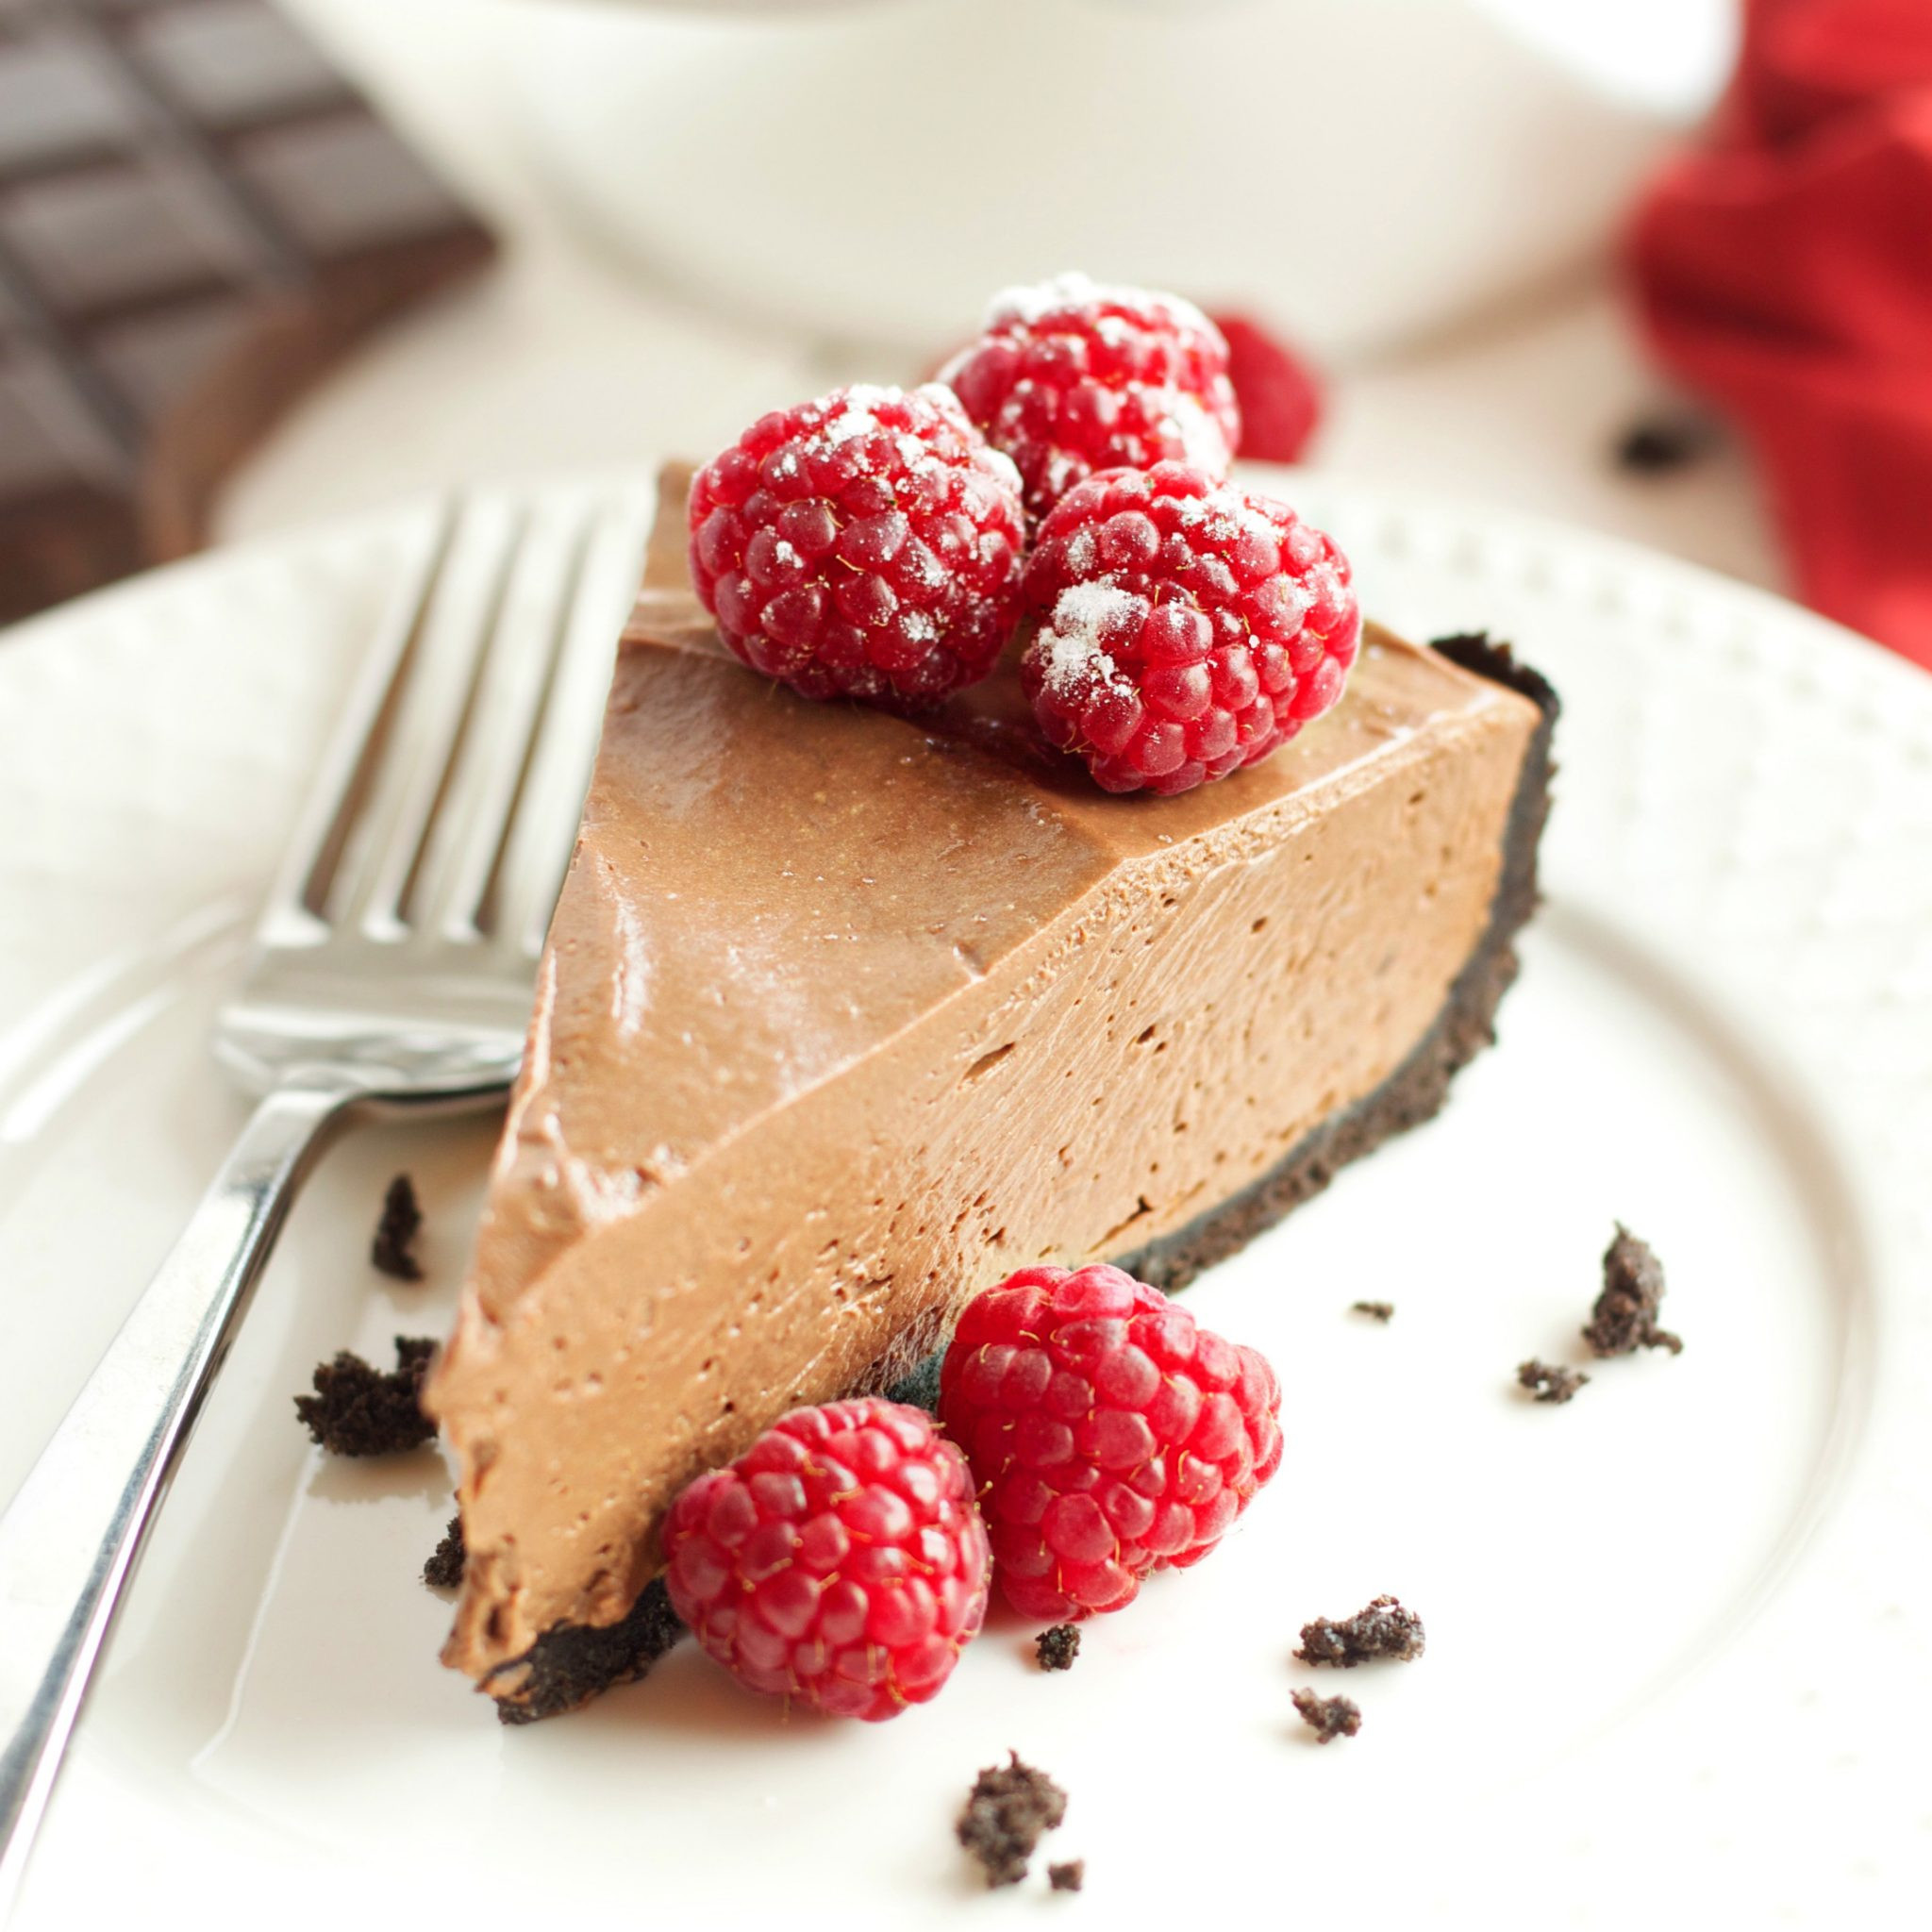 Pictures Of Desserts
 No Bake Chocolate Mousse Cheesecake Vegan and Dairy Free